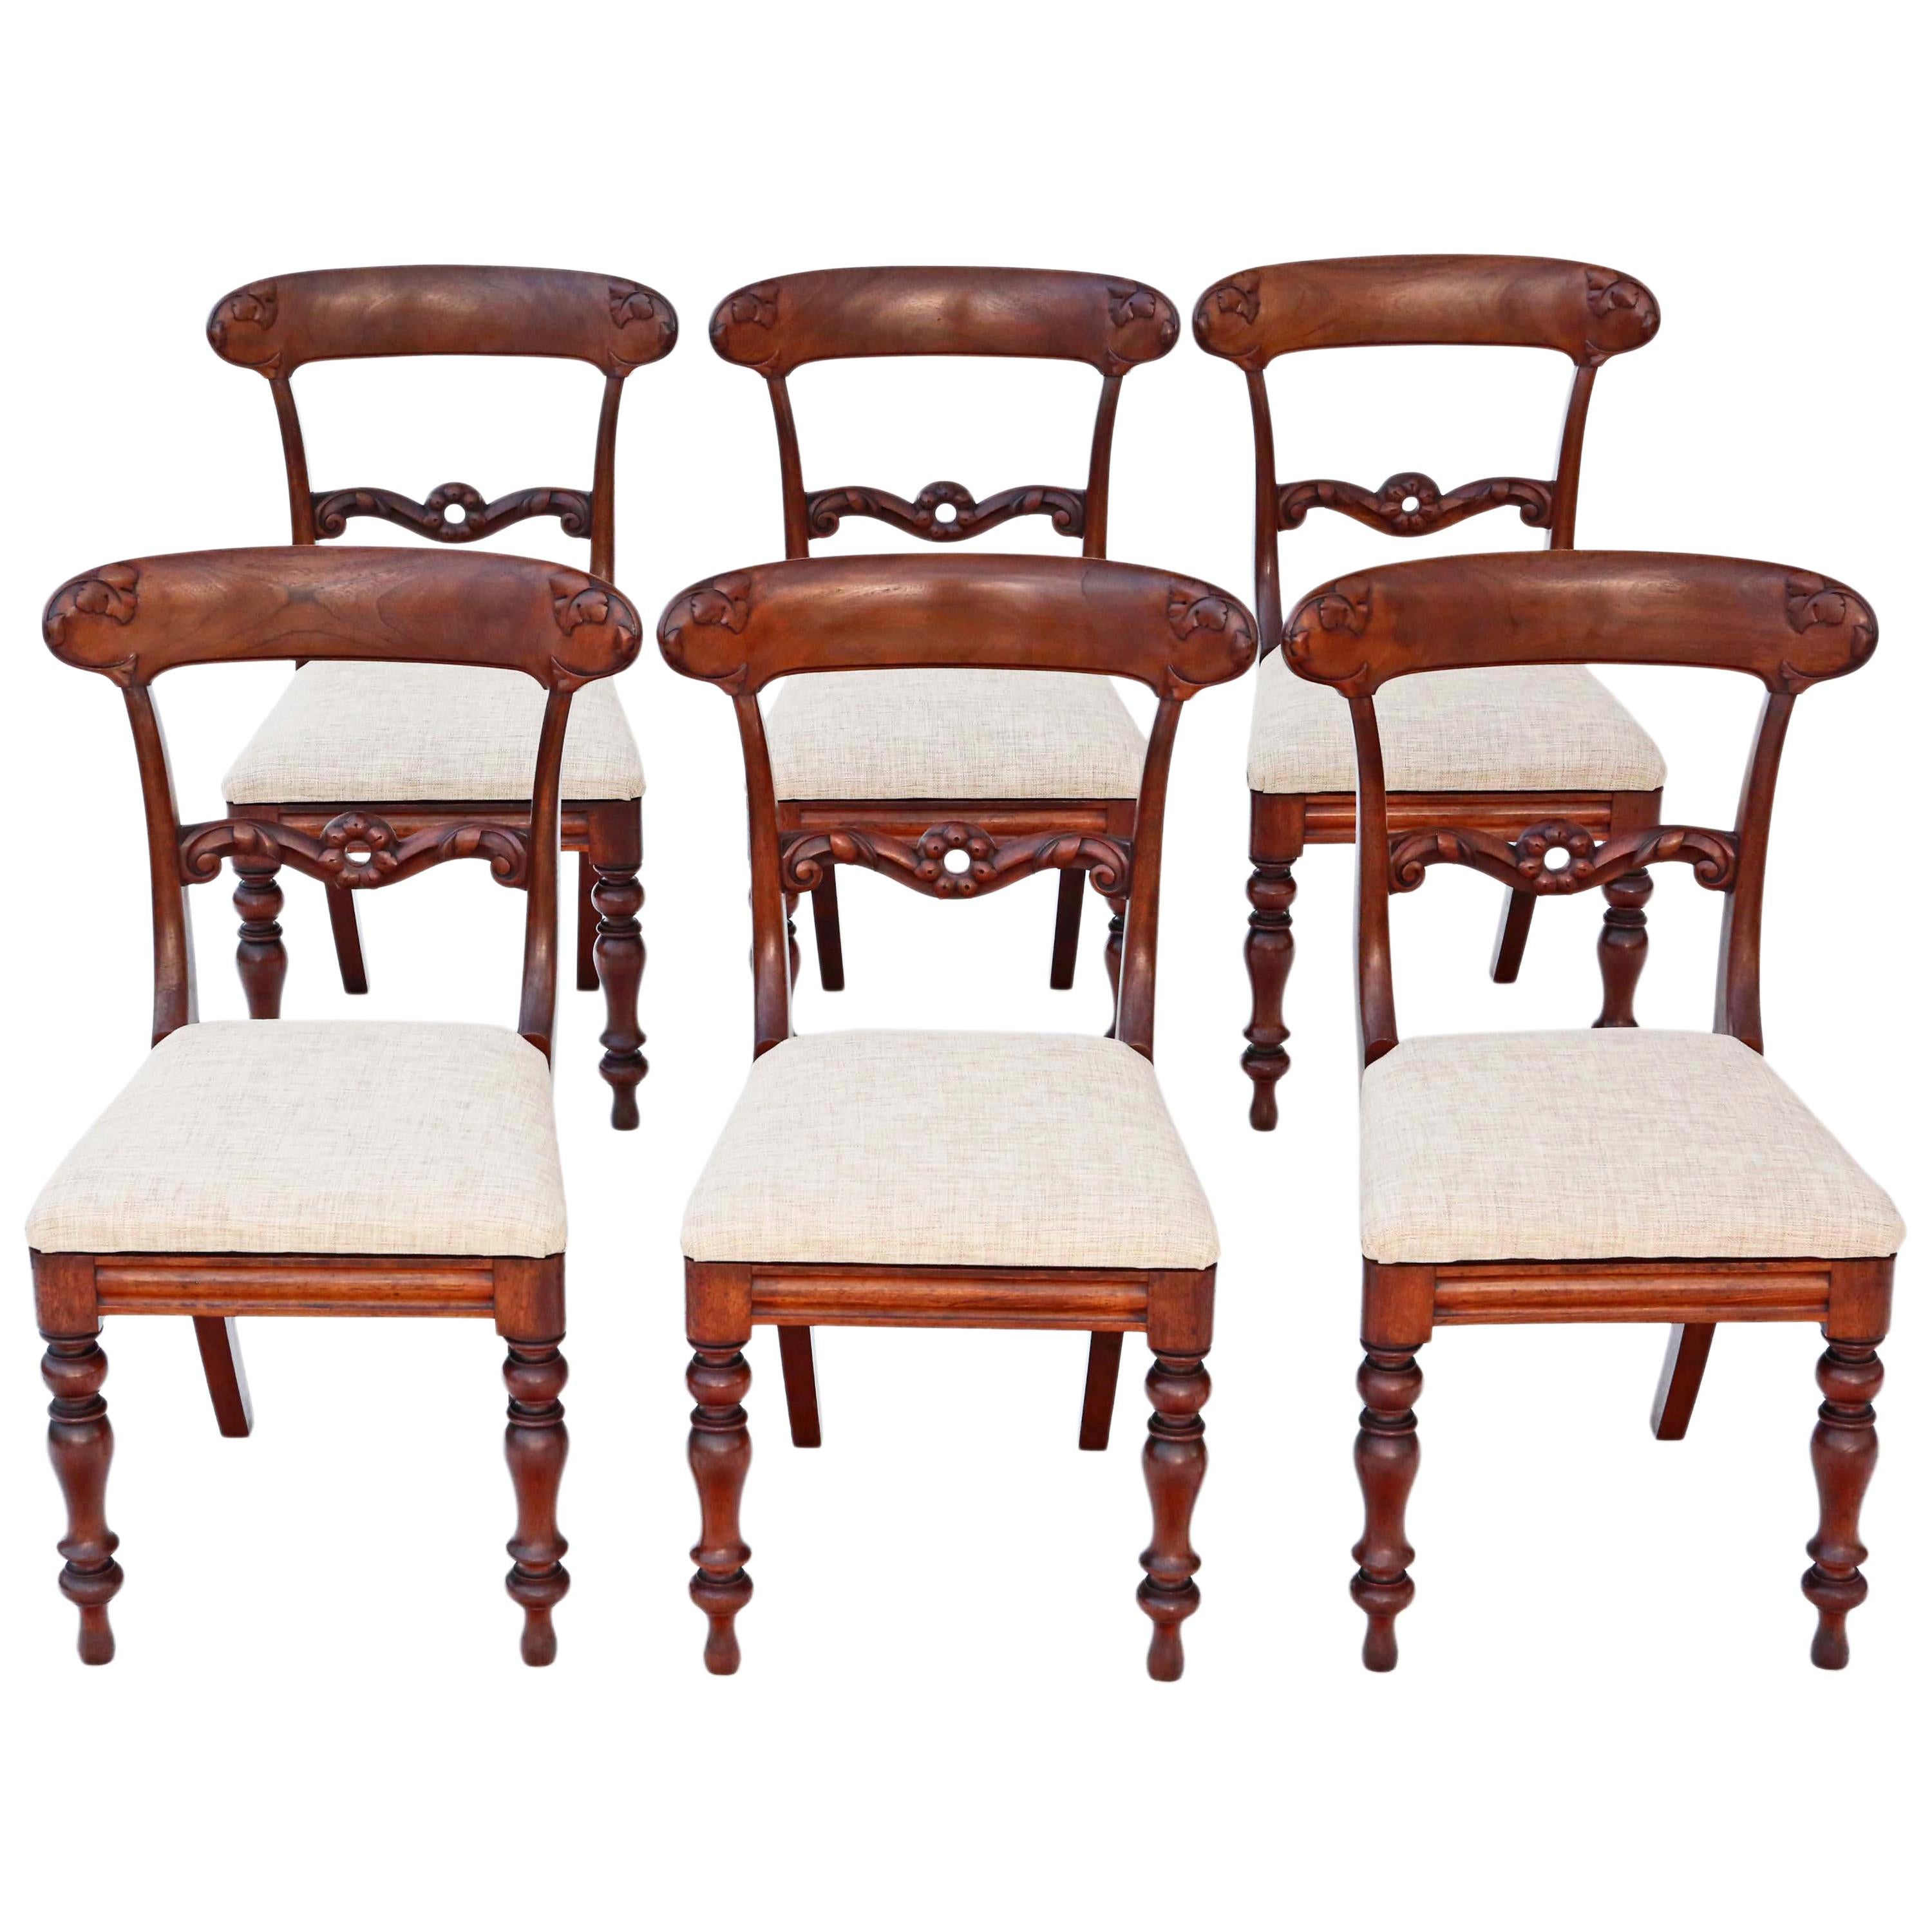 Set of 6 William IV Mahogany Rosewood Dining Chairs